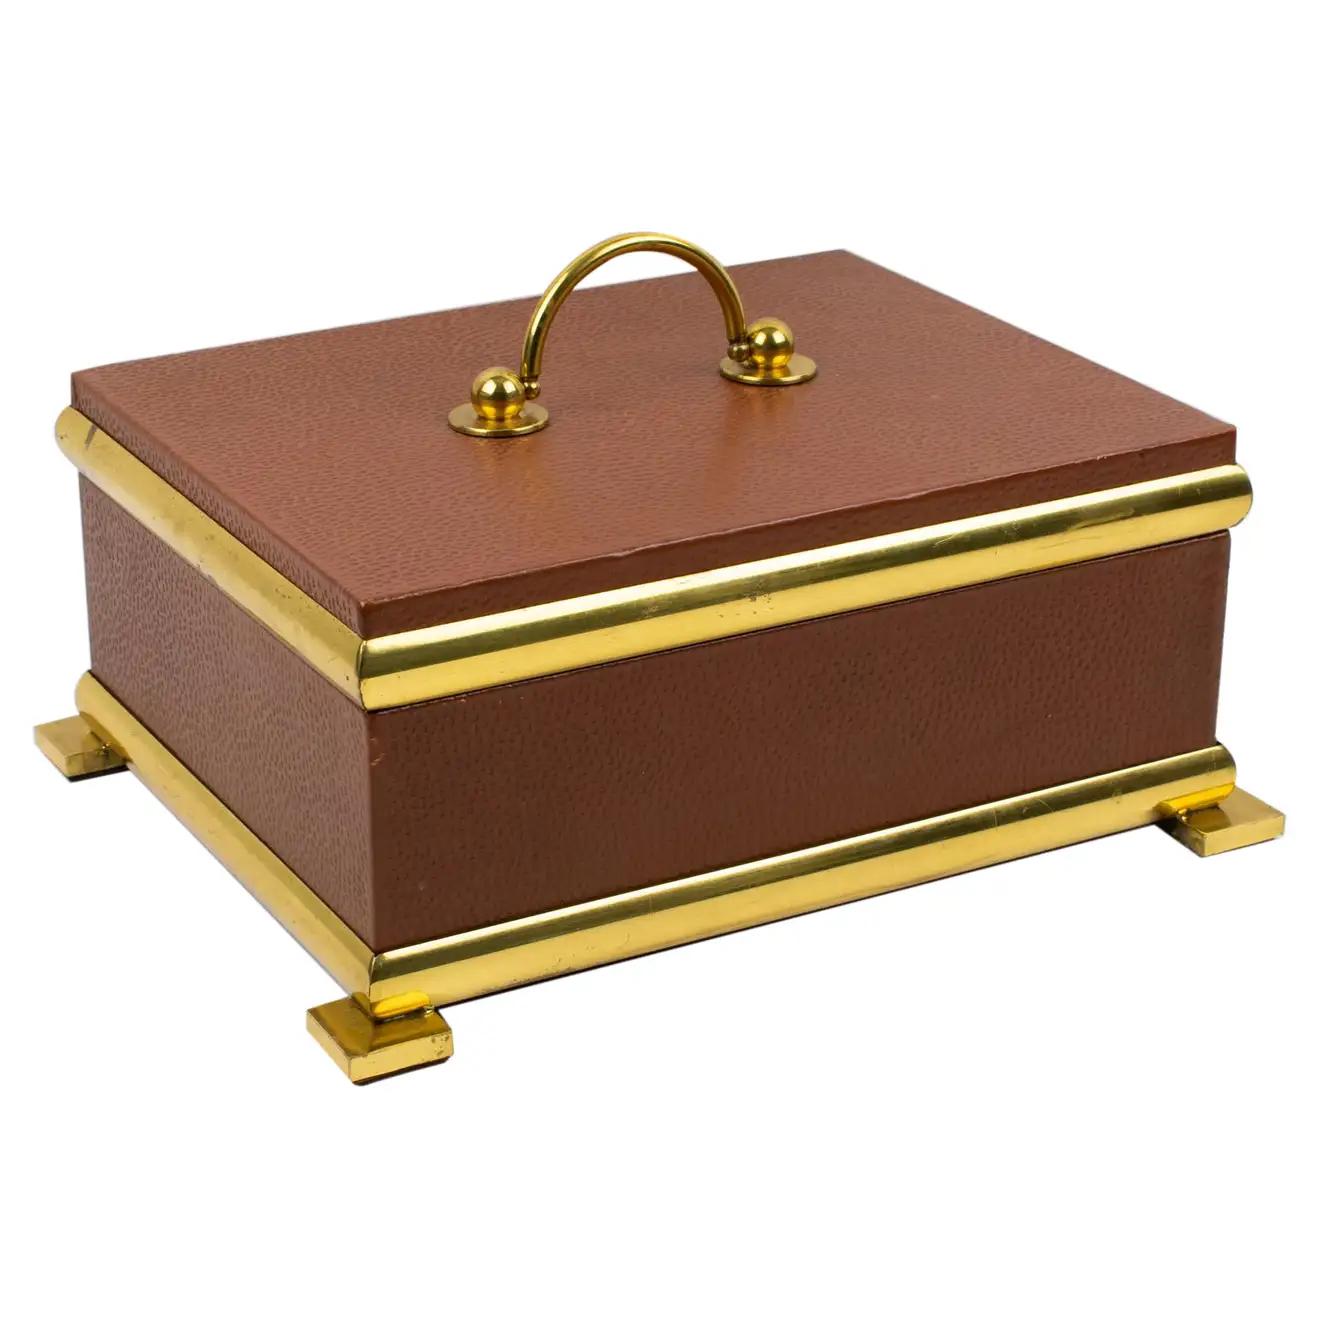 Italian Leather and Brass Decorative Box, 1950s Empire Style For Sale 11